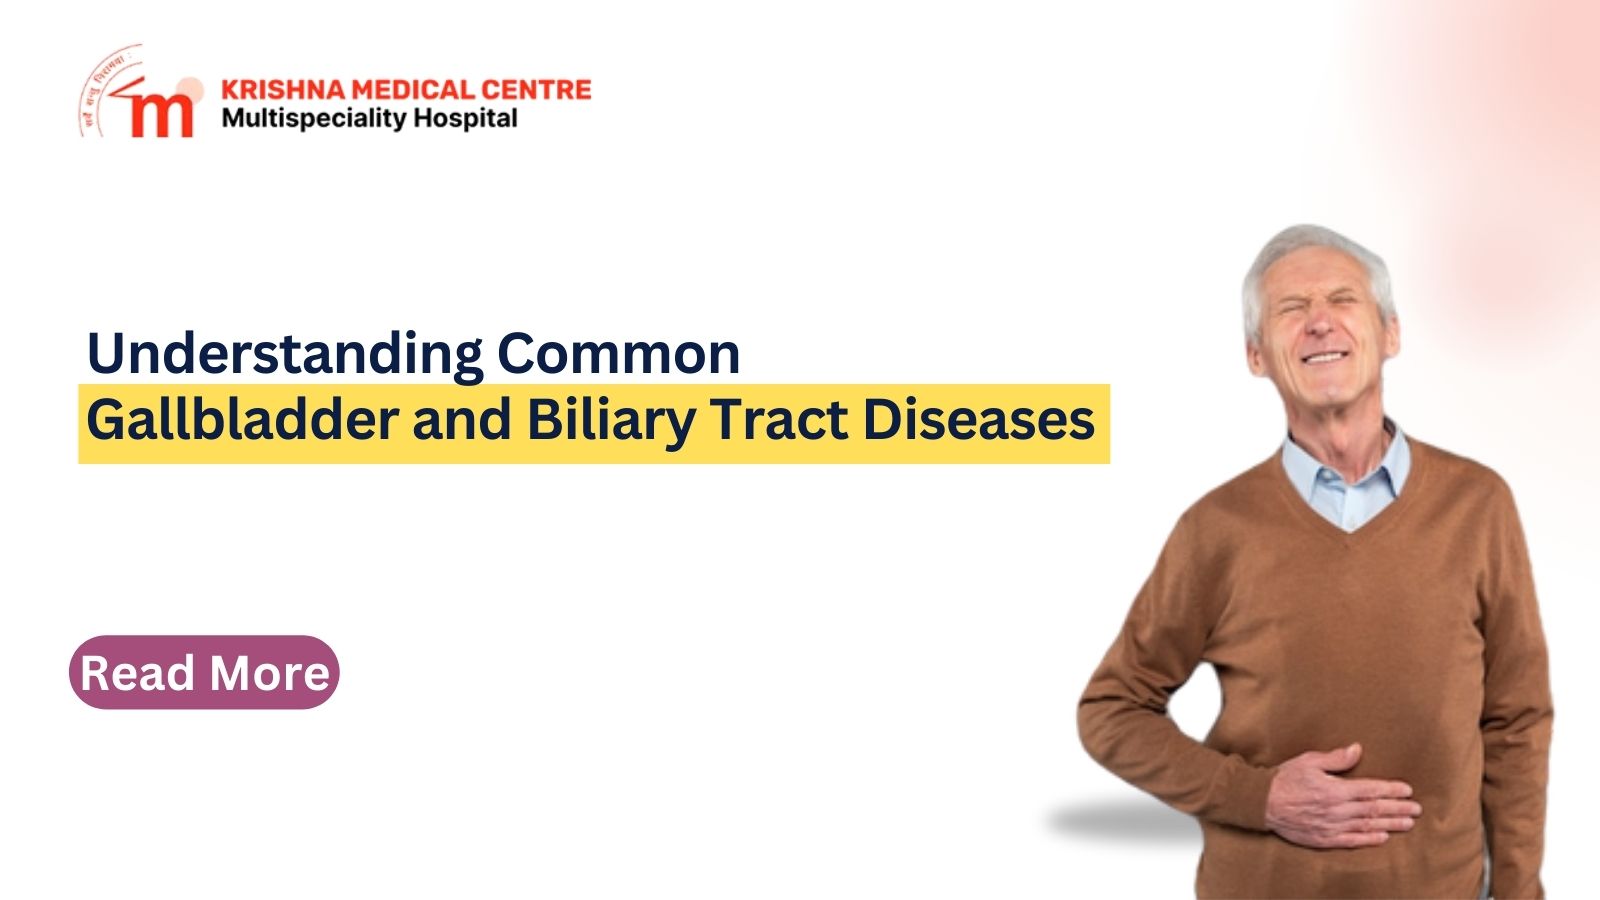 Describing gallbladder and biliary tract diseases and their cure